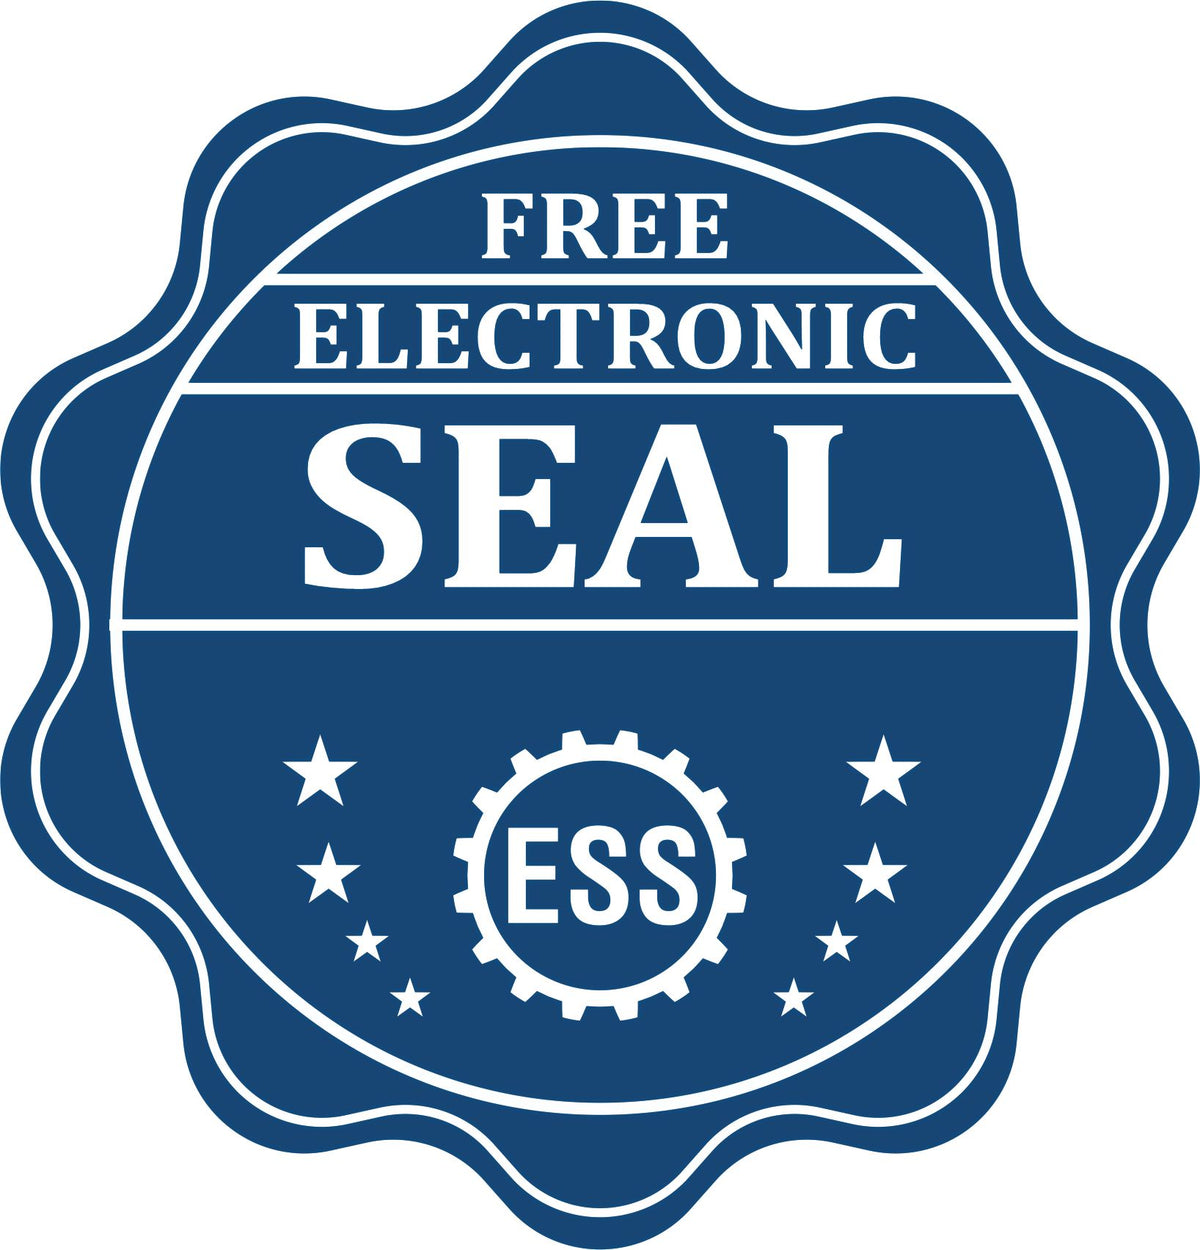 A badge showing a free electronic seal for the Premium MaxLight Pre-Inked Colorado Geology Stamp with stars and the ESS gear on the emblem.